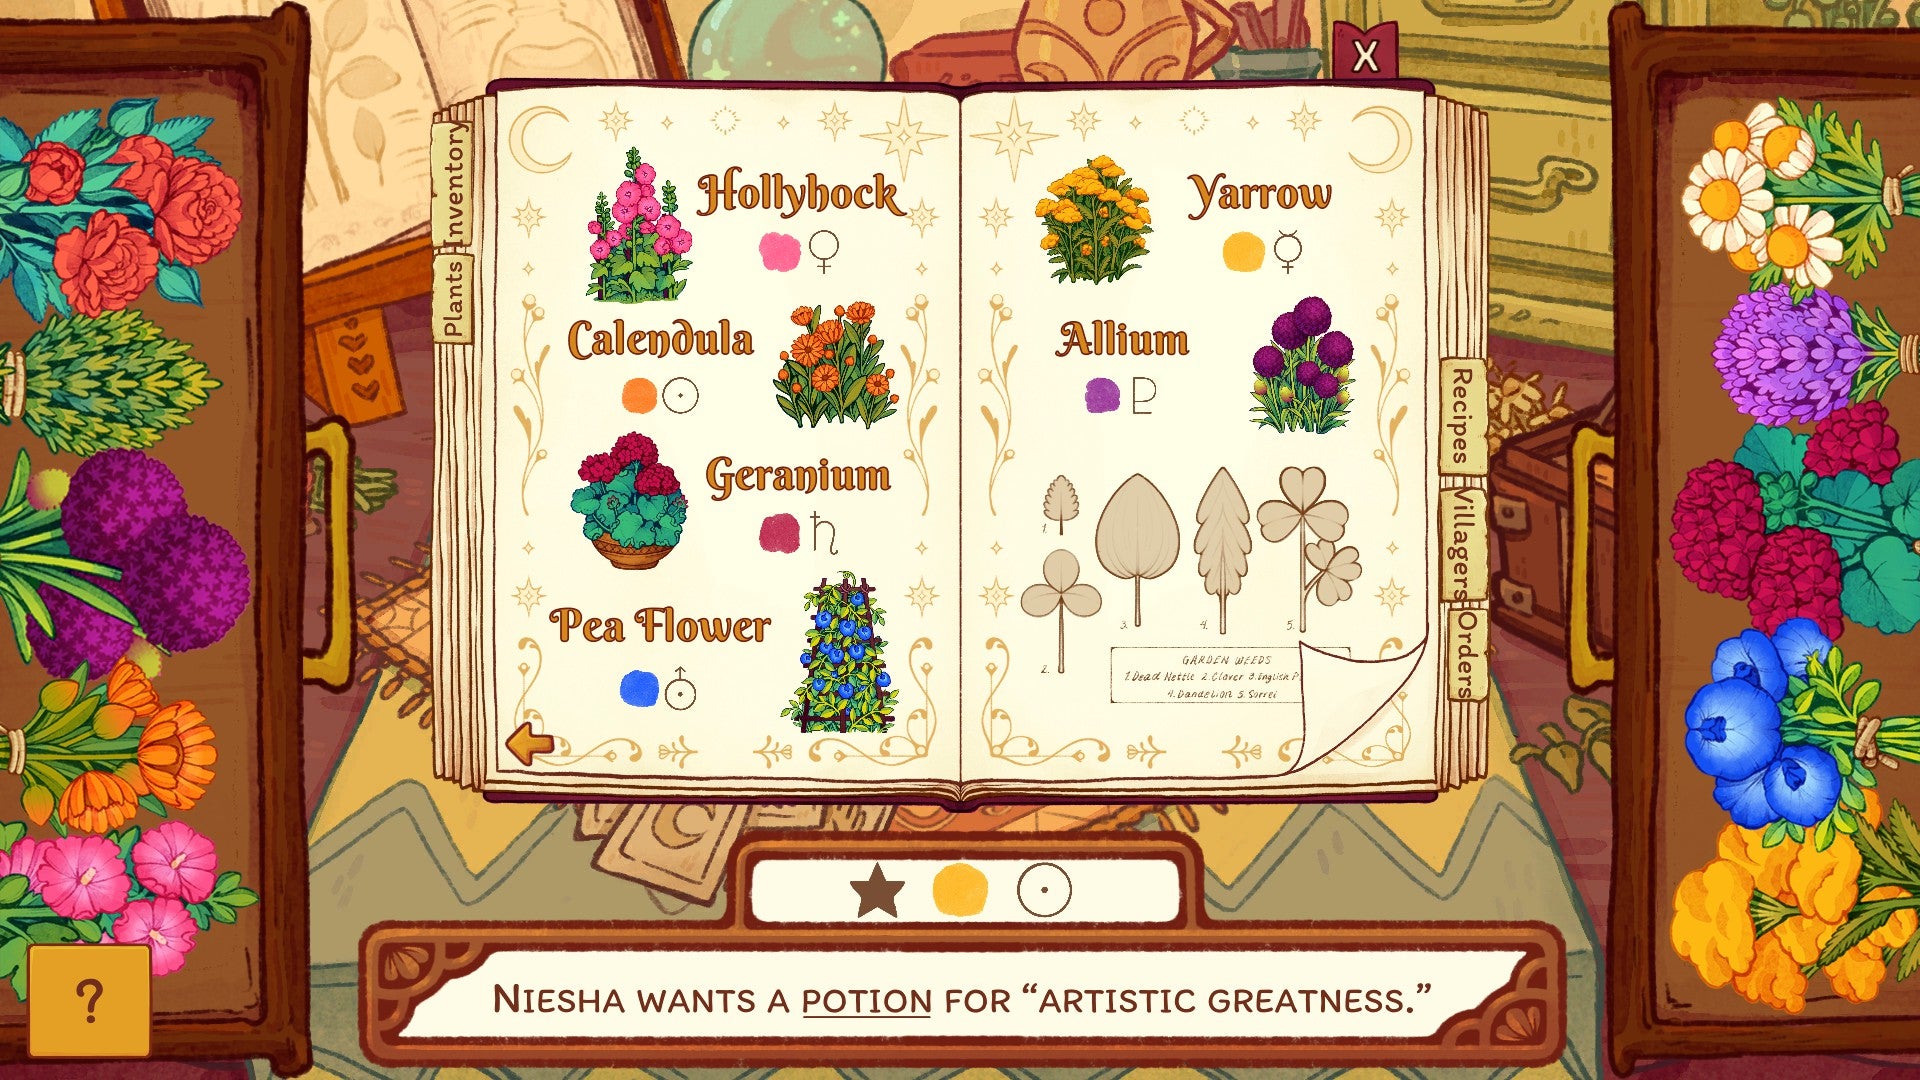 A Witchy Life Story screenshot of a book showing recipes for magical potions